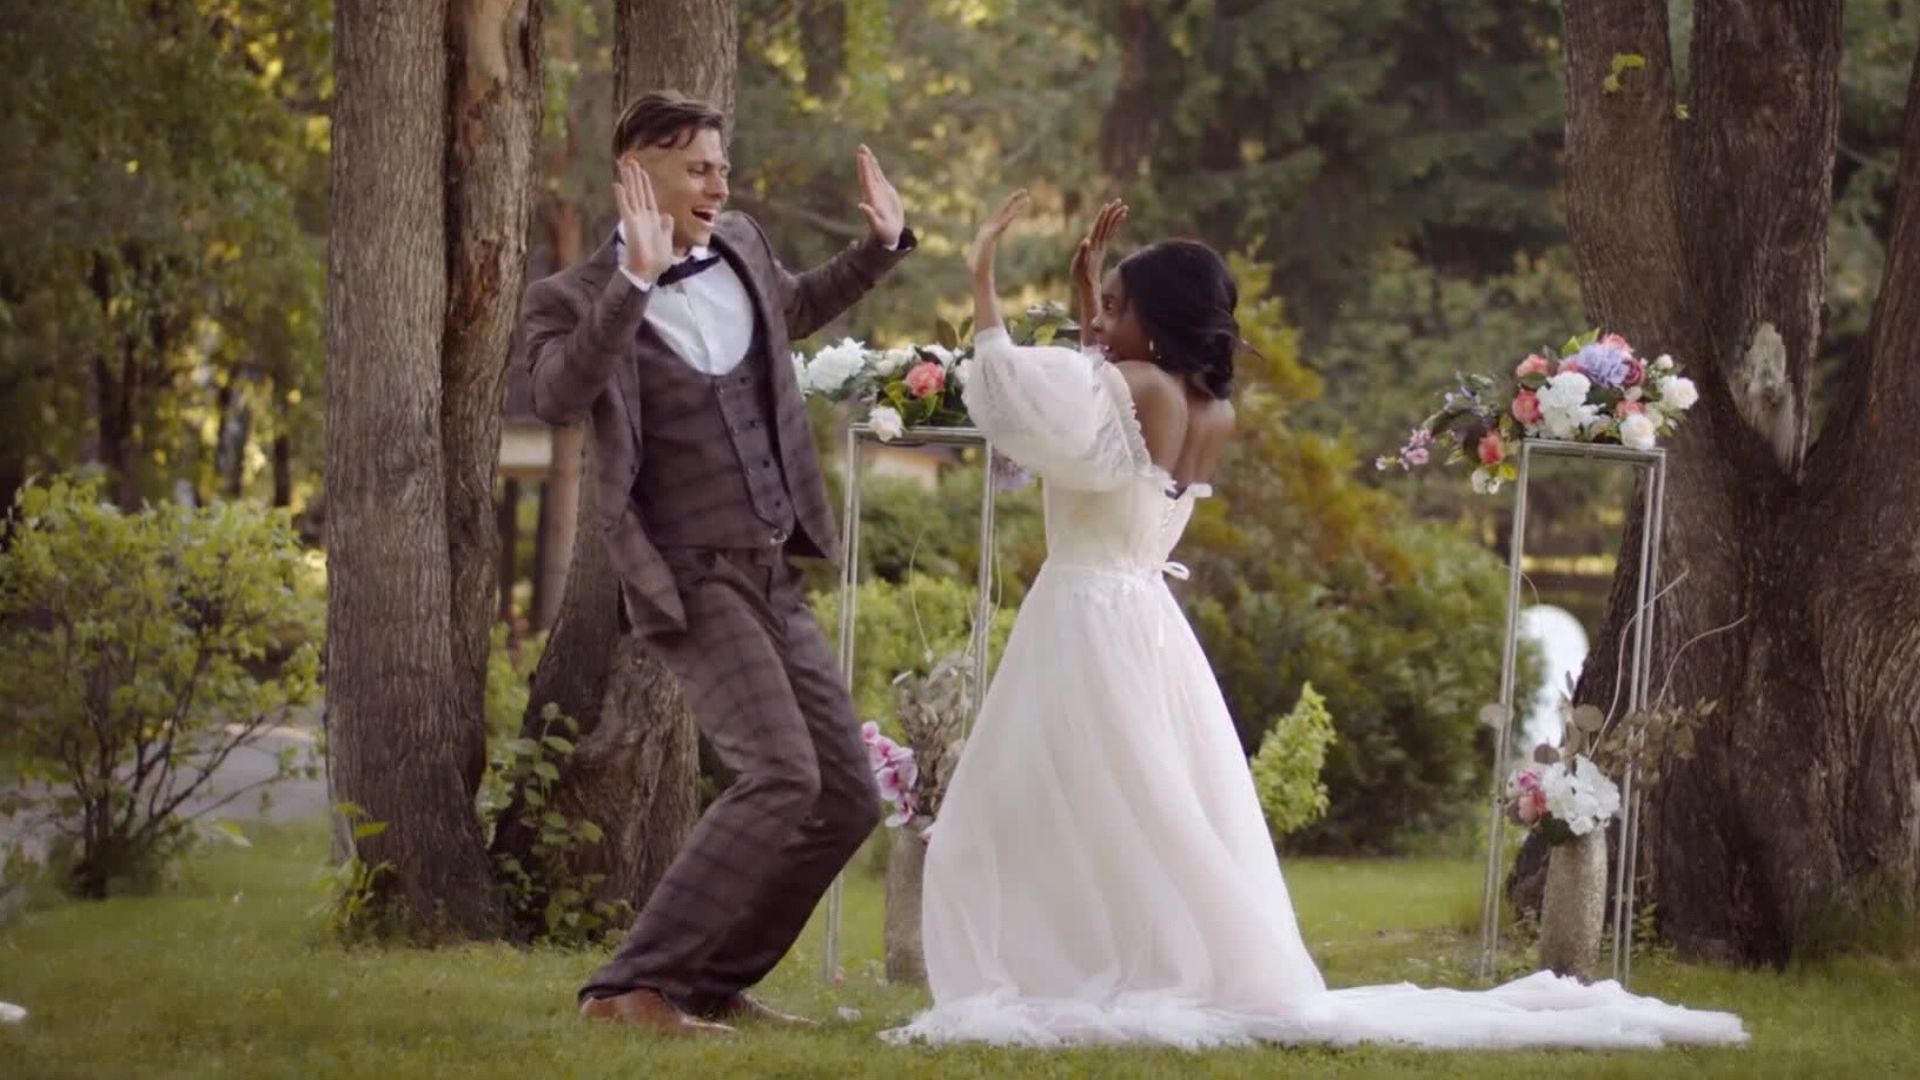 Young newlyweds dancing outside with their hands raised